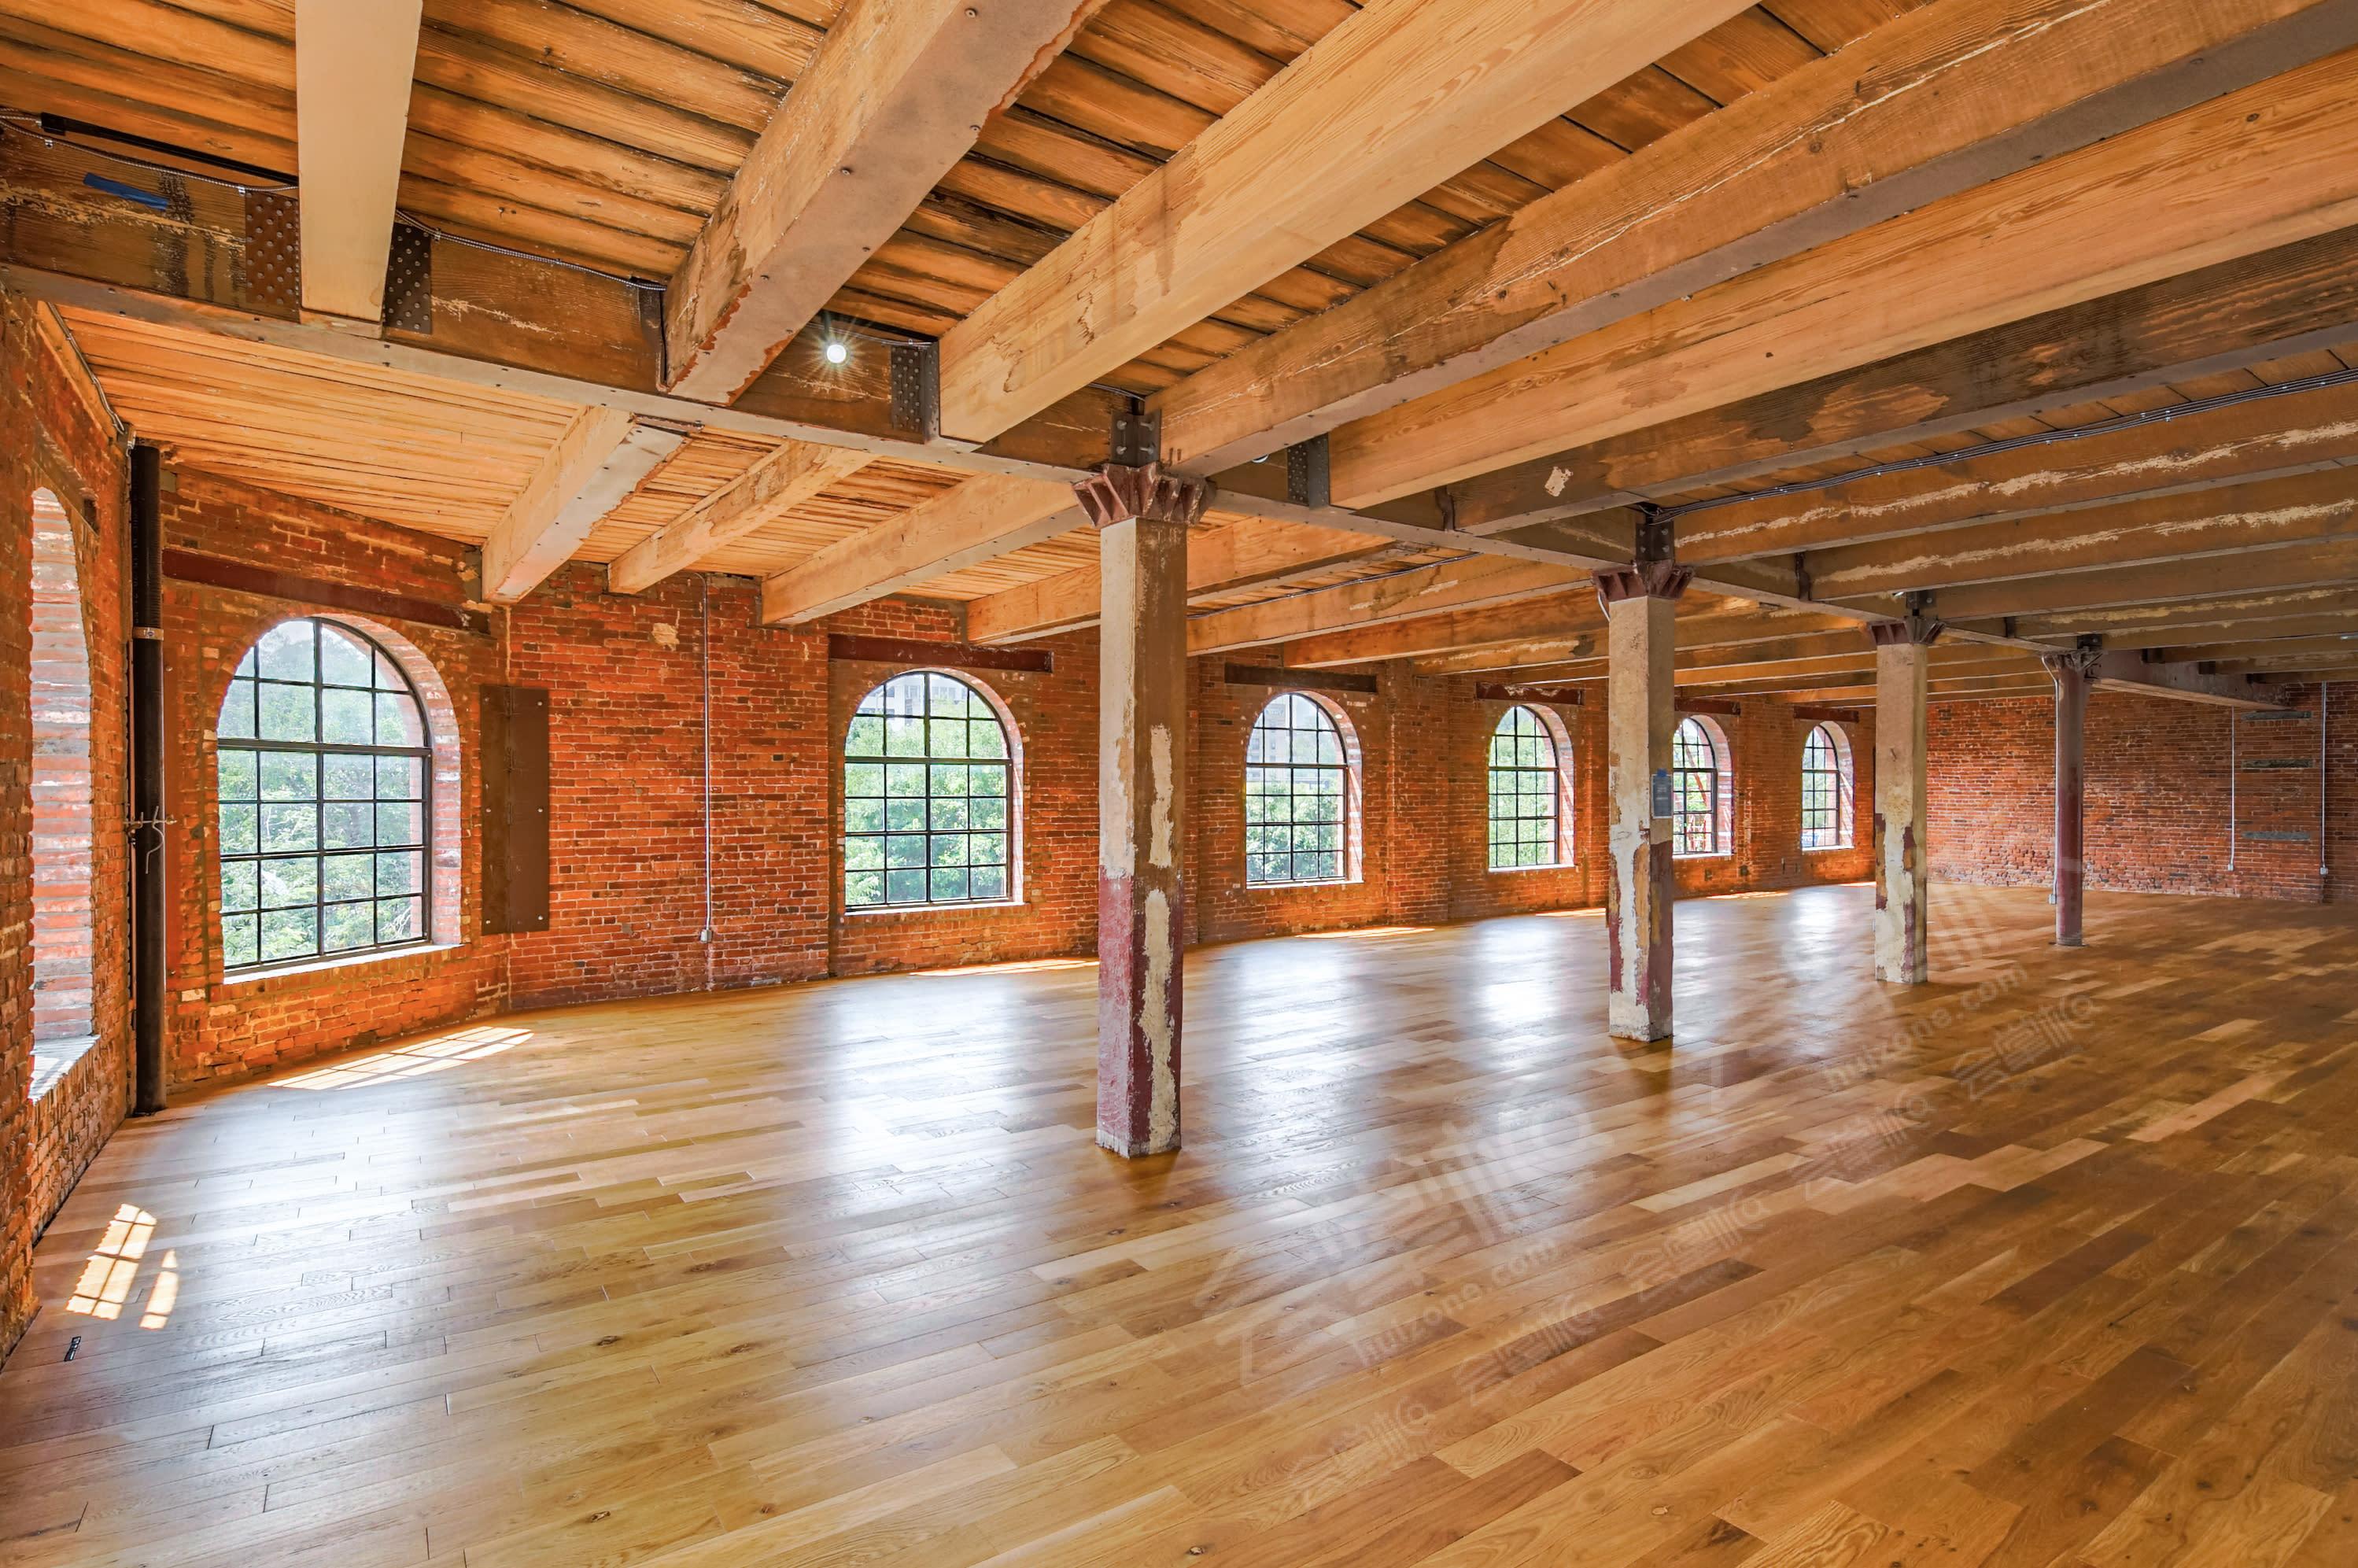 Historic Brick Studio featuring Beautiful Arched Windows and High Ceilings